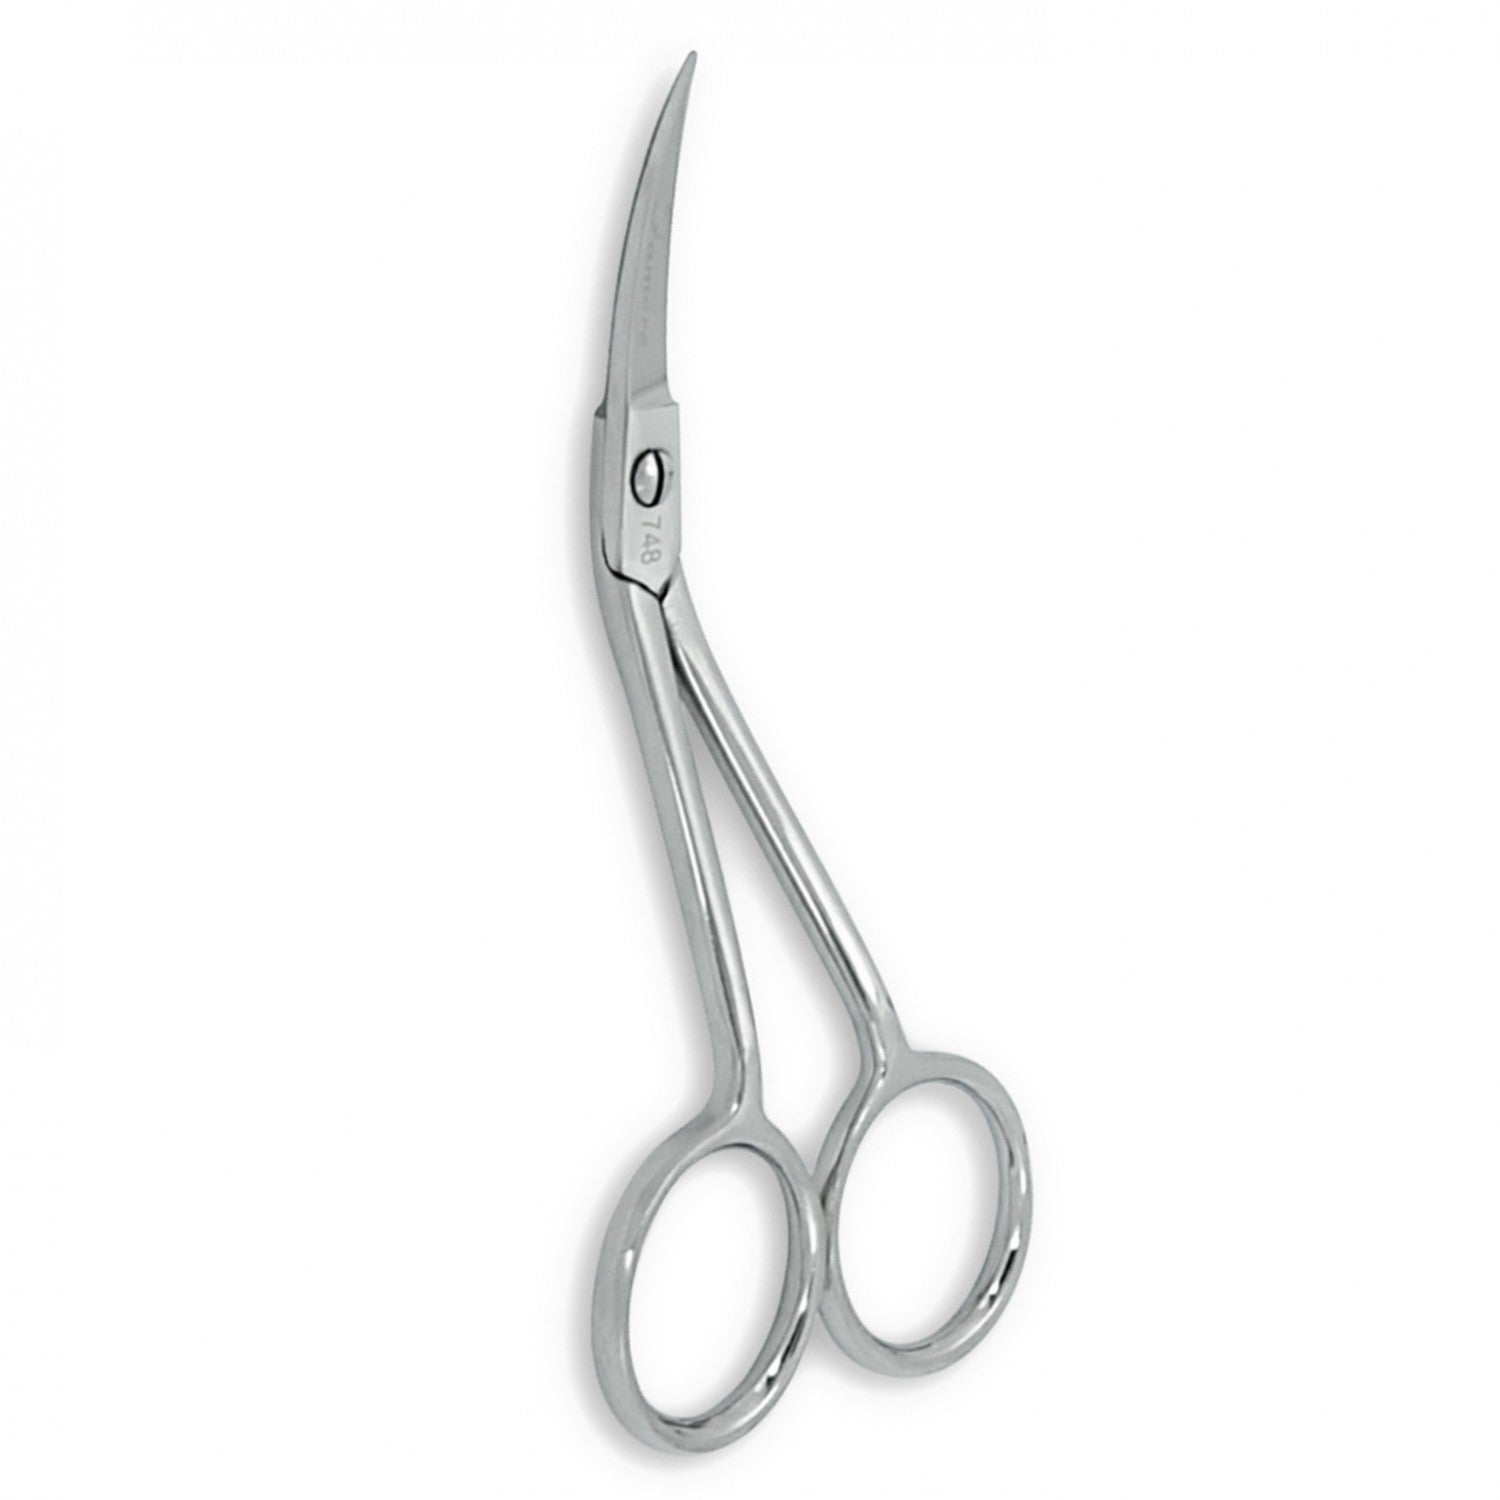 4-Inch Mini Double Curved Embroidery Scissors from Famore Cutlery